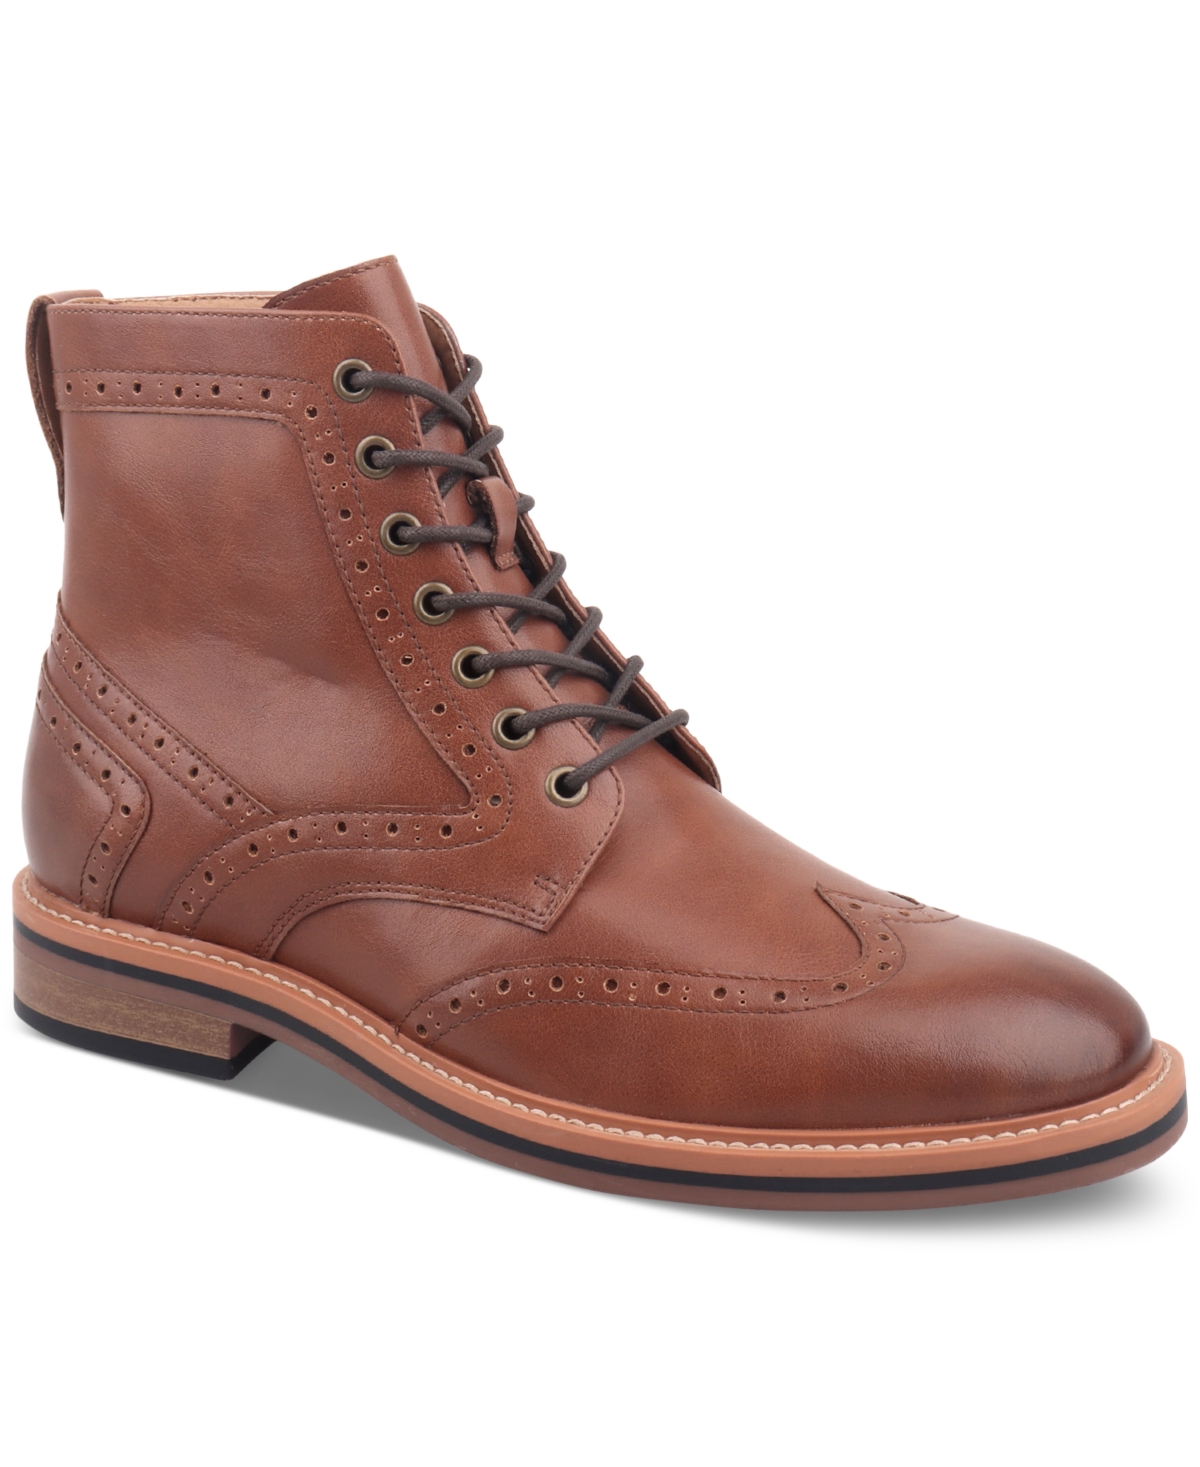 Men's Axford Lace-Up Wingtip Boots, Created for Macy's - Tan